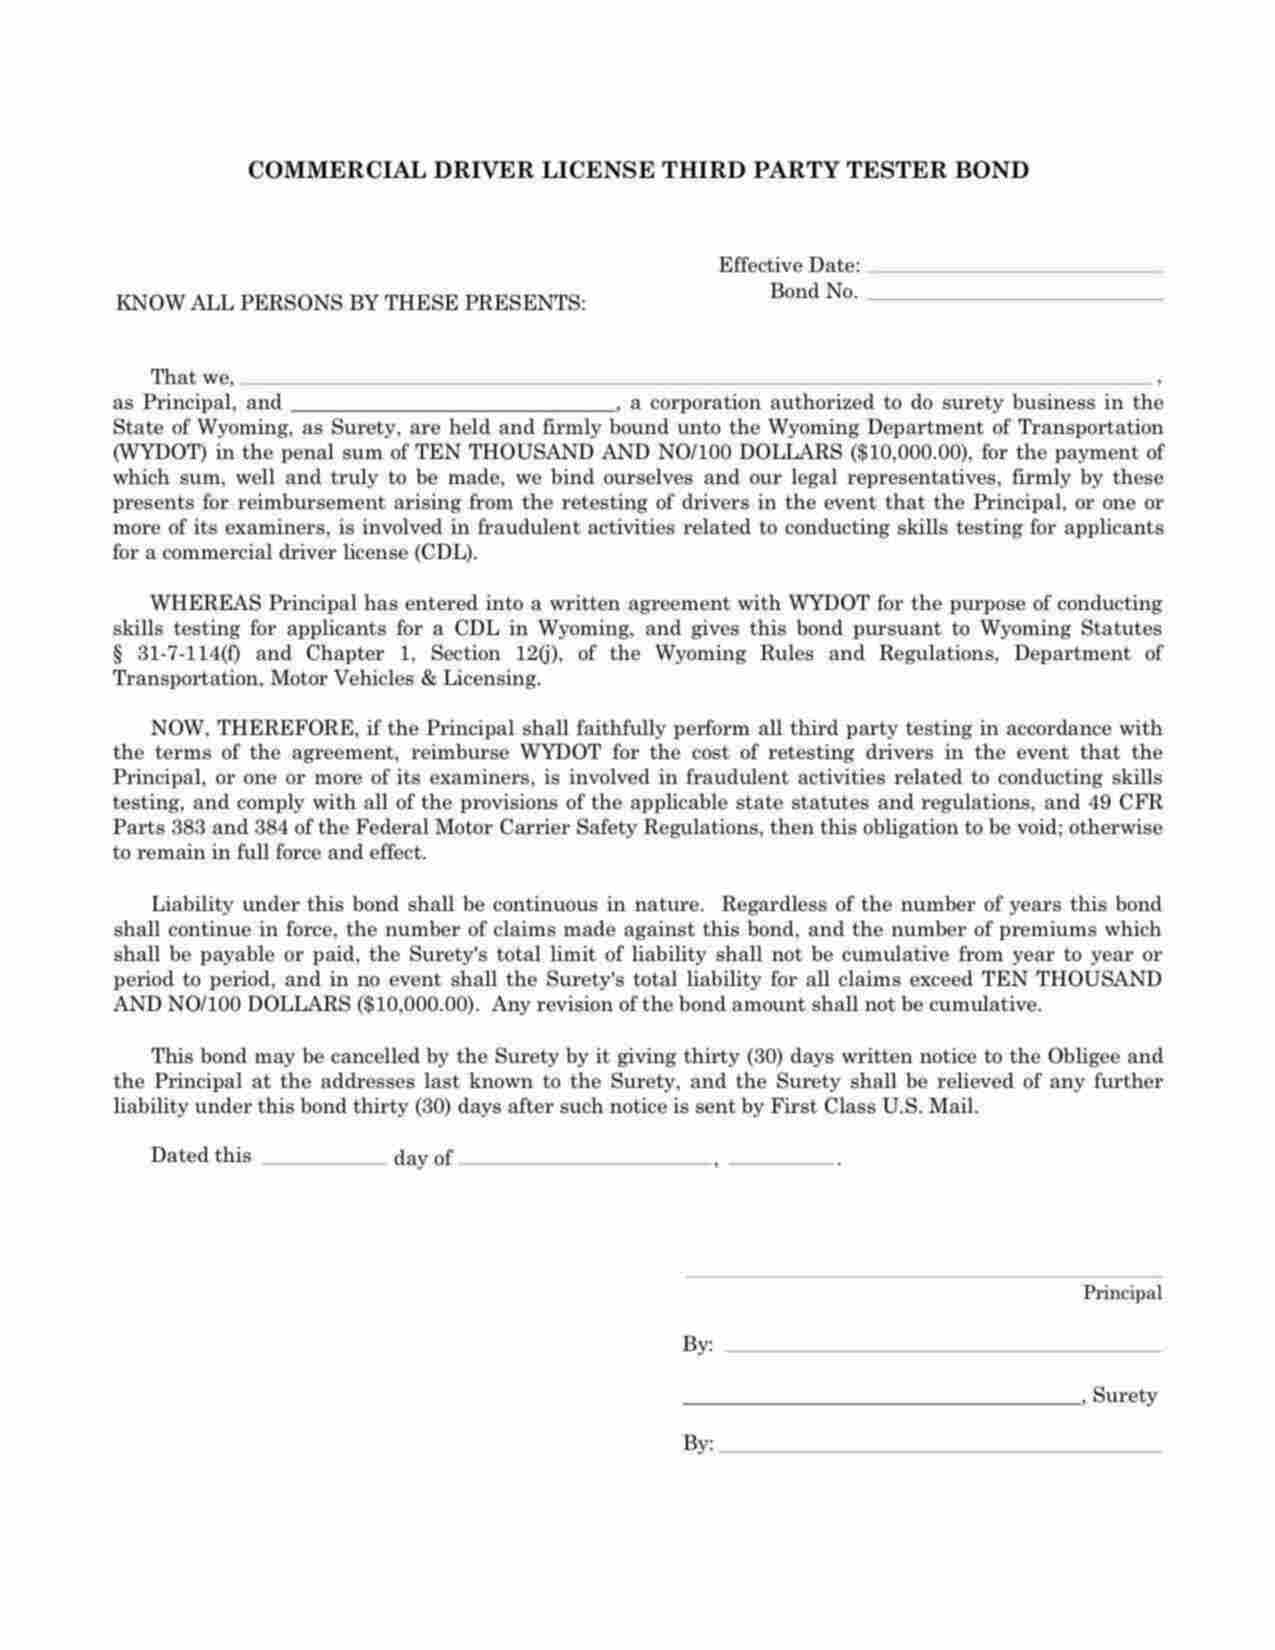 Wyoming Commercial Driver License (CDL) Third Party Tester Bond Form